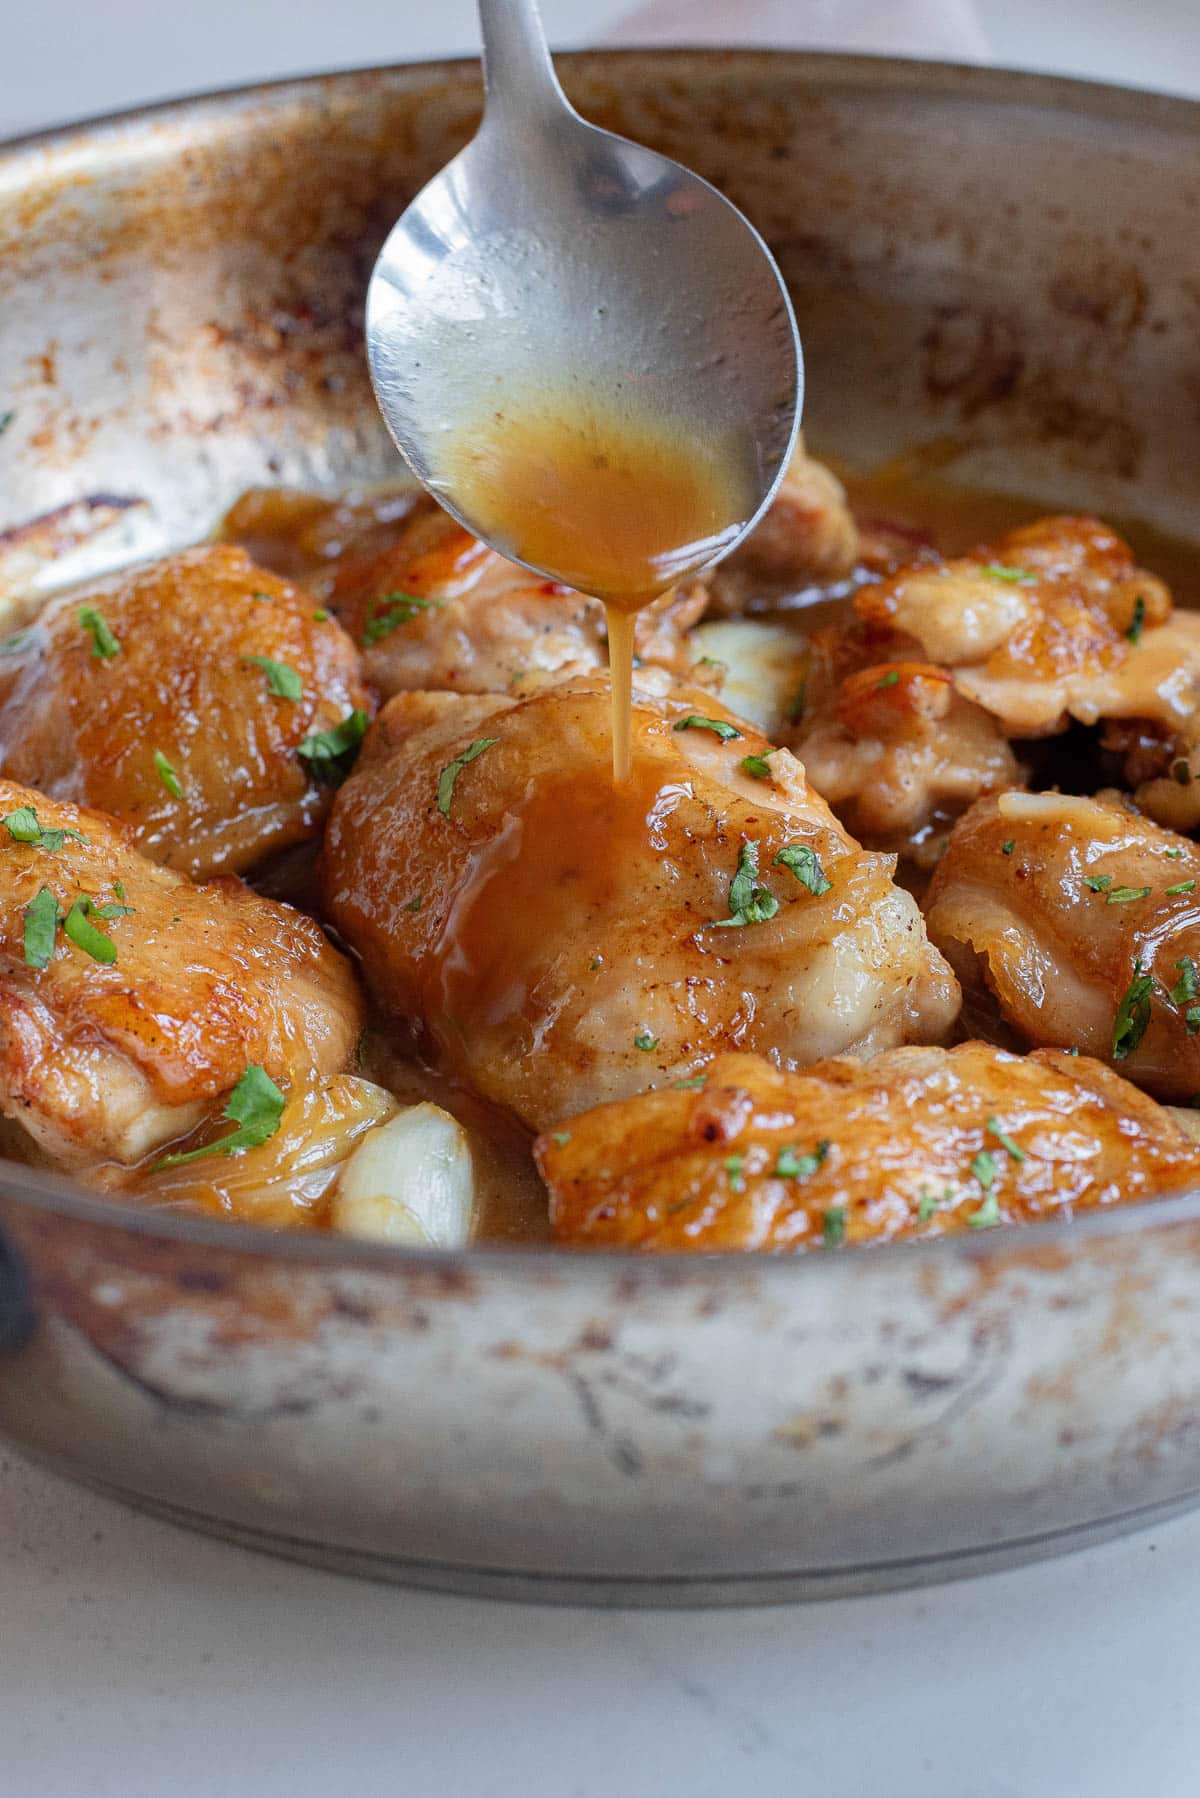 Spooning gravy over cooked chicken thighs in a skillet.